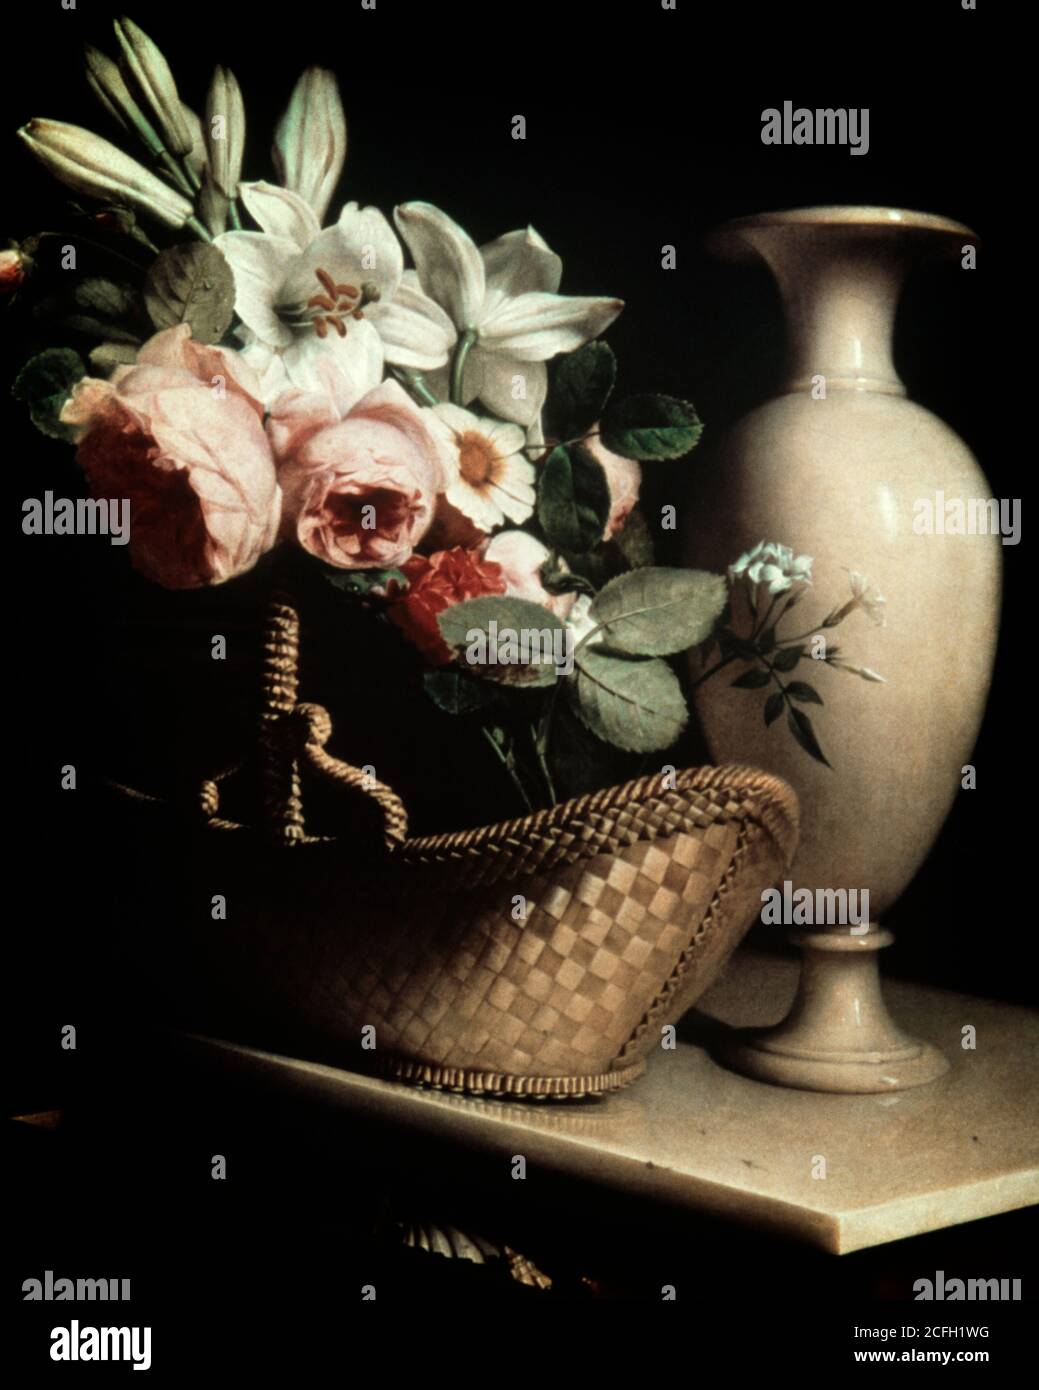 1970s WHITE LILIES PINK ROSES GERBER DAISY CLASSICAL STYLE FLOWER ARRANGEMENT IN ANTIQUE WOVEN BASKET BESIDE A MARBLE VASE - kf15195 PHT001 HARS POSH GERBER LILIES PLUSH AFFECTION CHARMING CLASSY CREATIVITY EMOTION EMOTIONAL EMOTIONS LONGING SMOOTH WISTFUL WOVEN LUSH OLD FASHIONED SUBLIME Stock Photo